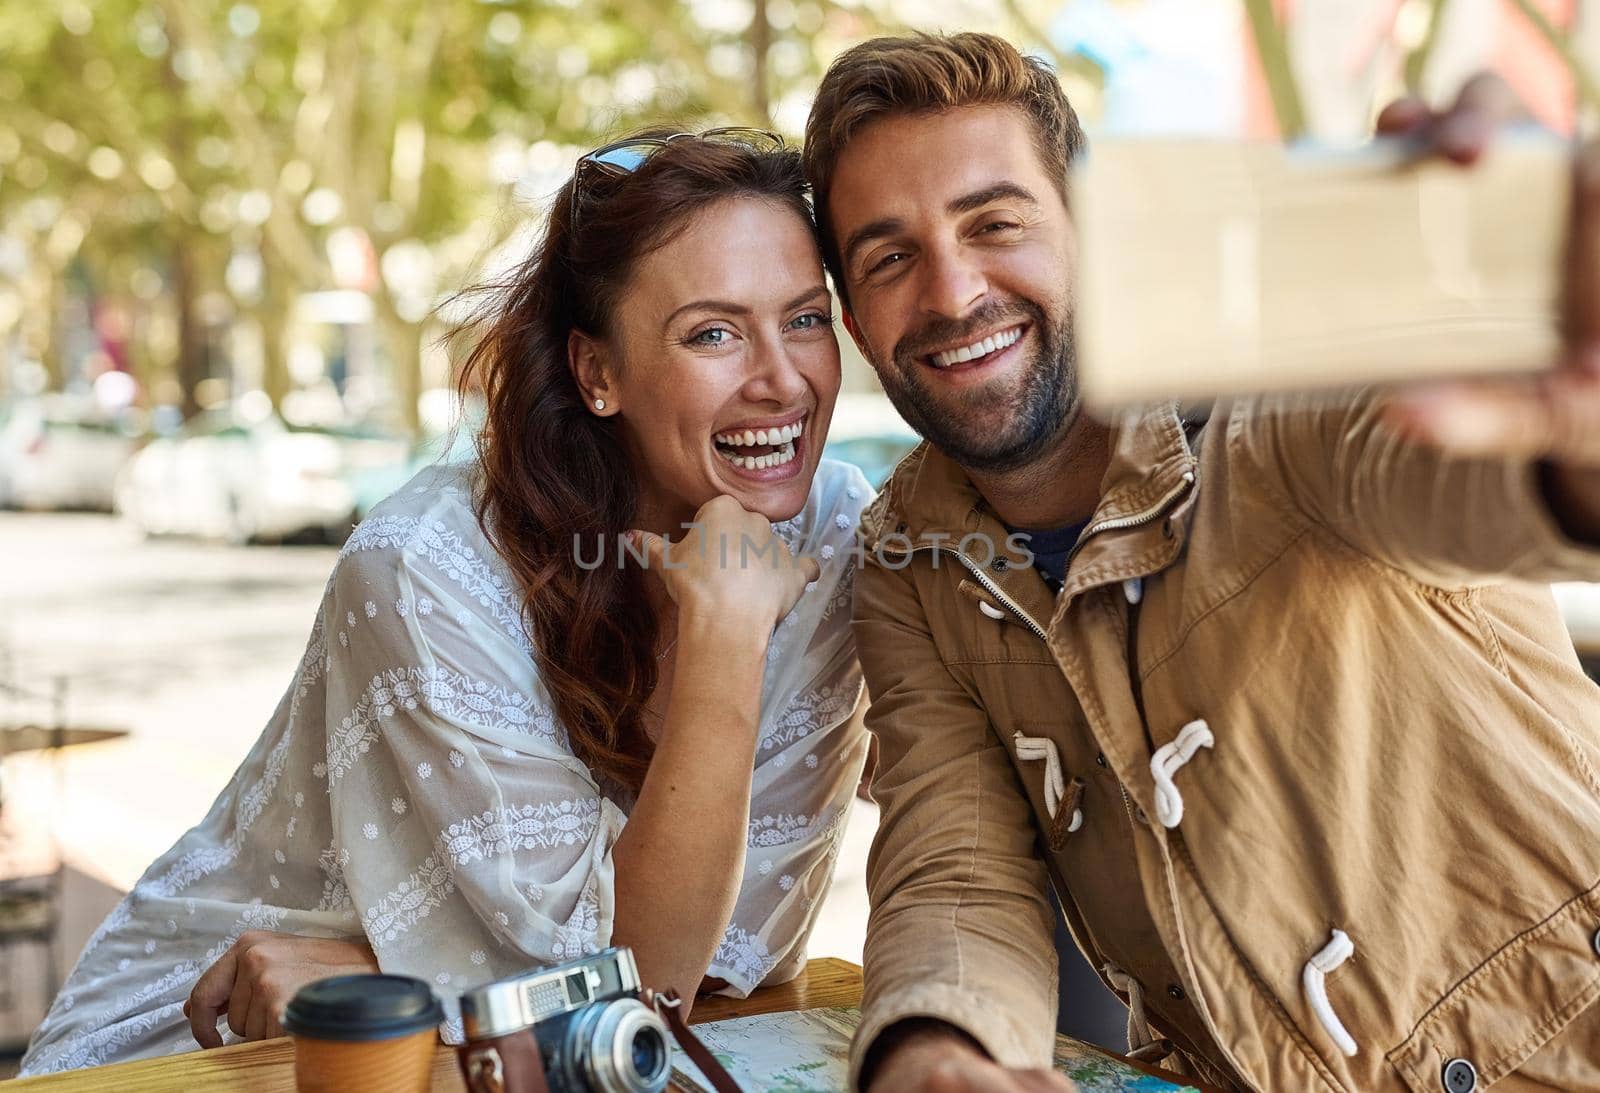 Shot of a happy tourist couple taking a selfie while relaxing at a sidewalk cafe together.